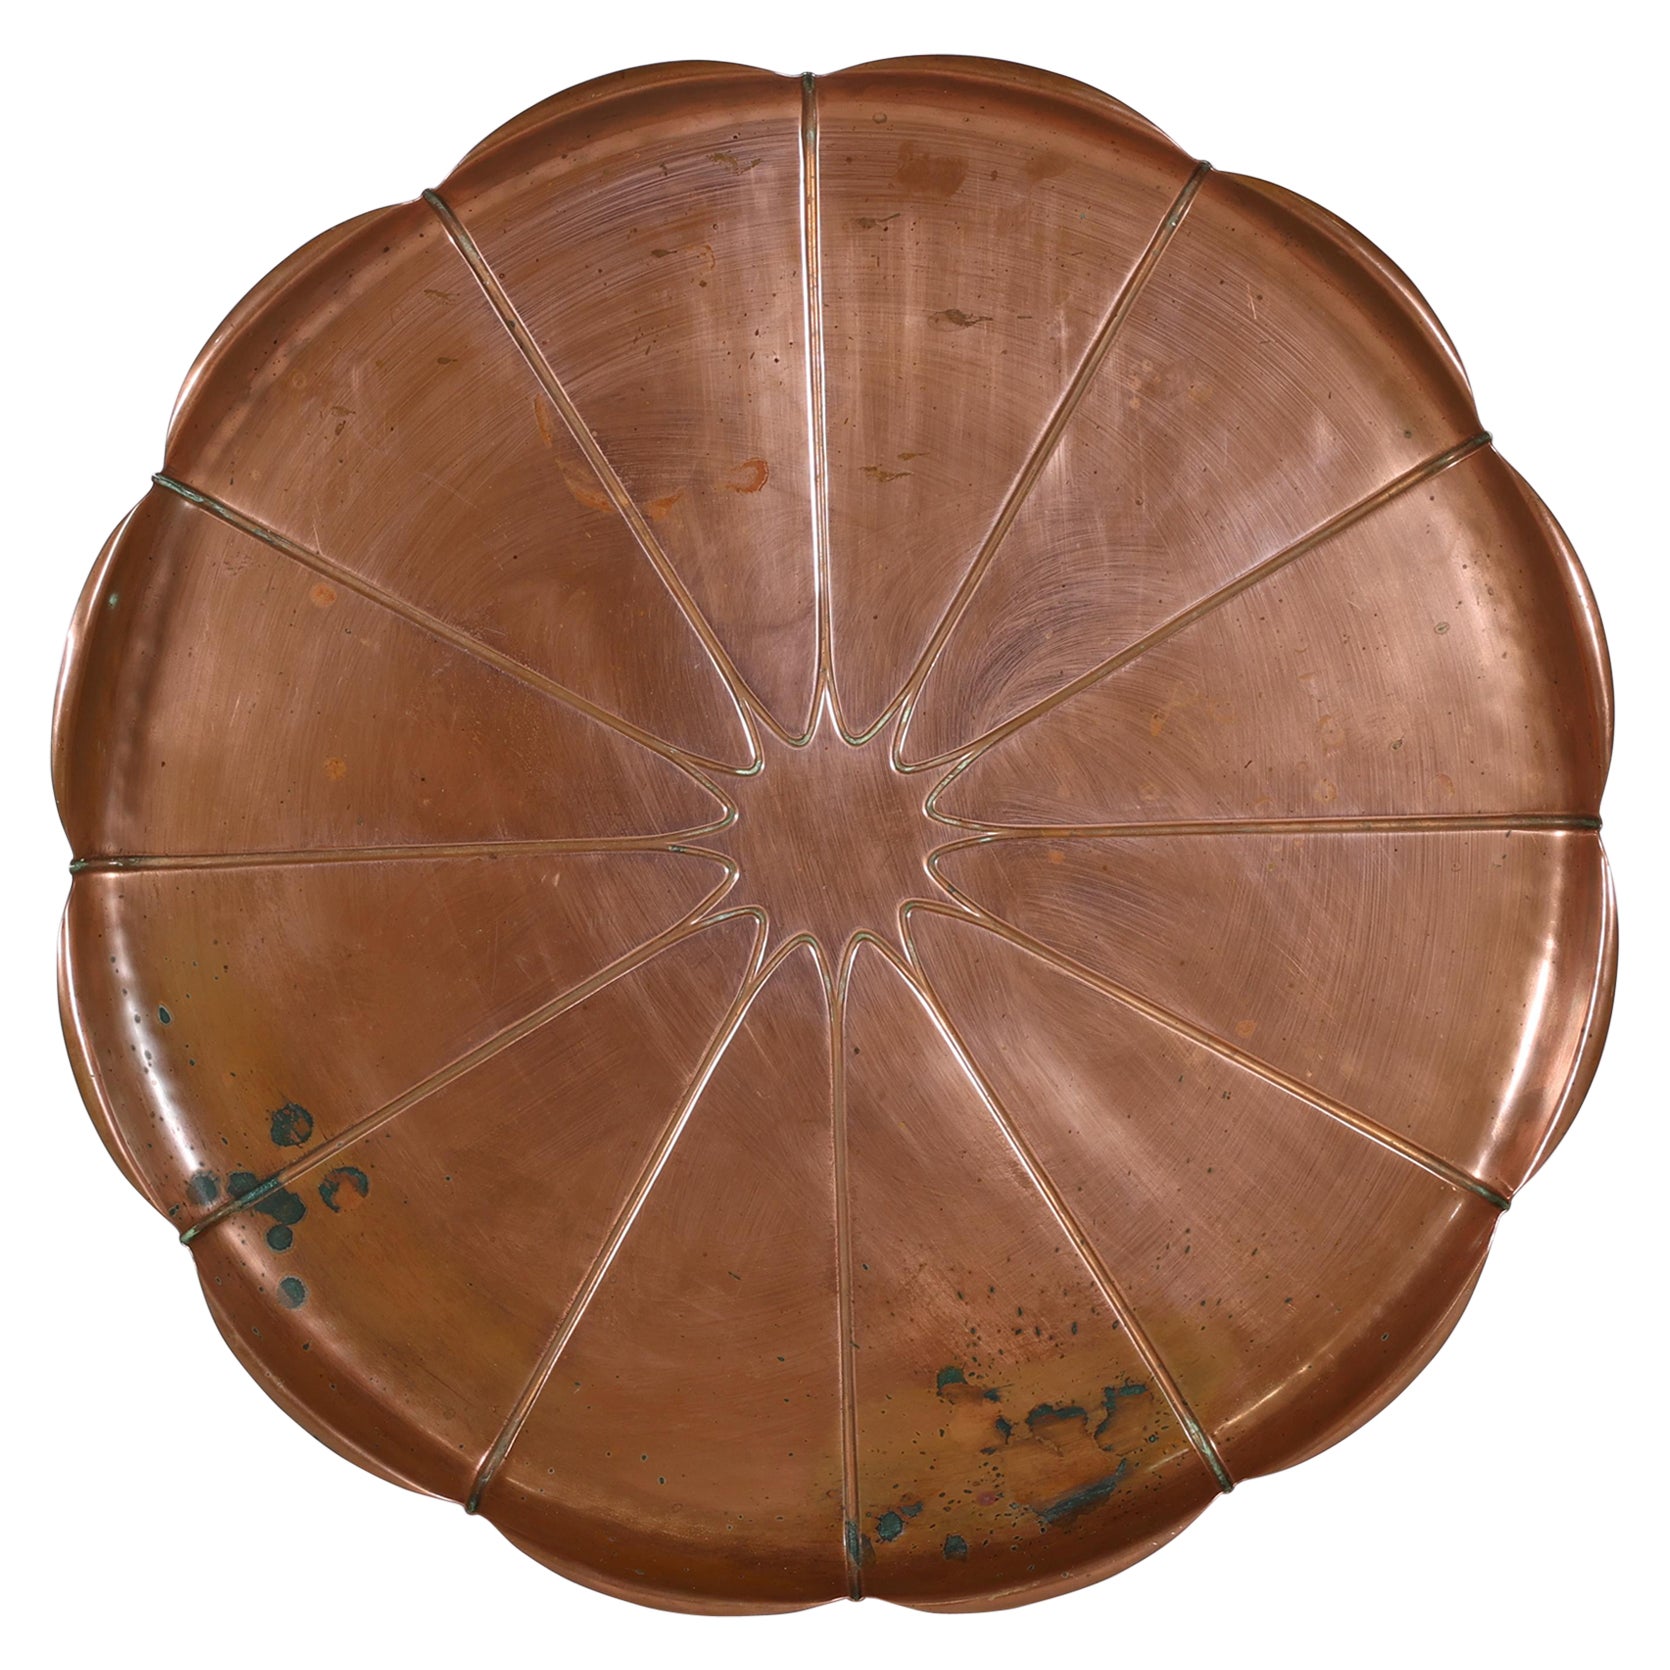 WAS Benson stamped mark. A very large Arts and Crafts copper lily pad tray.